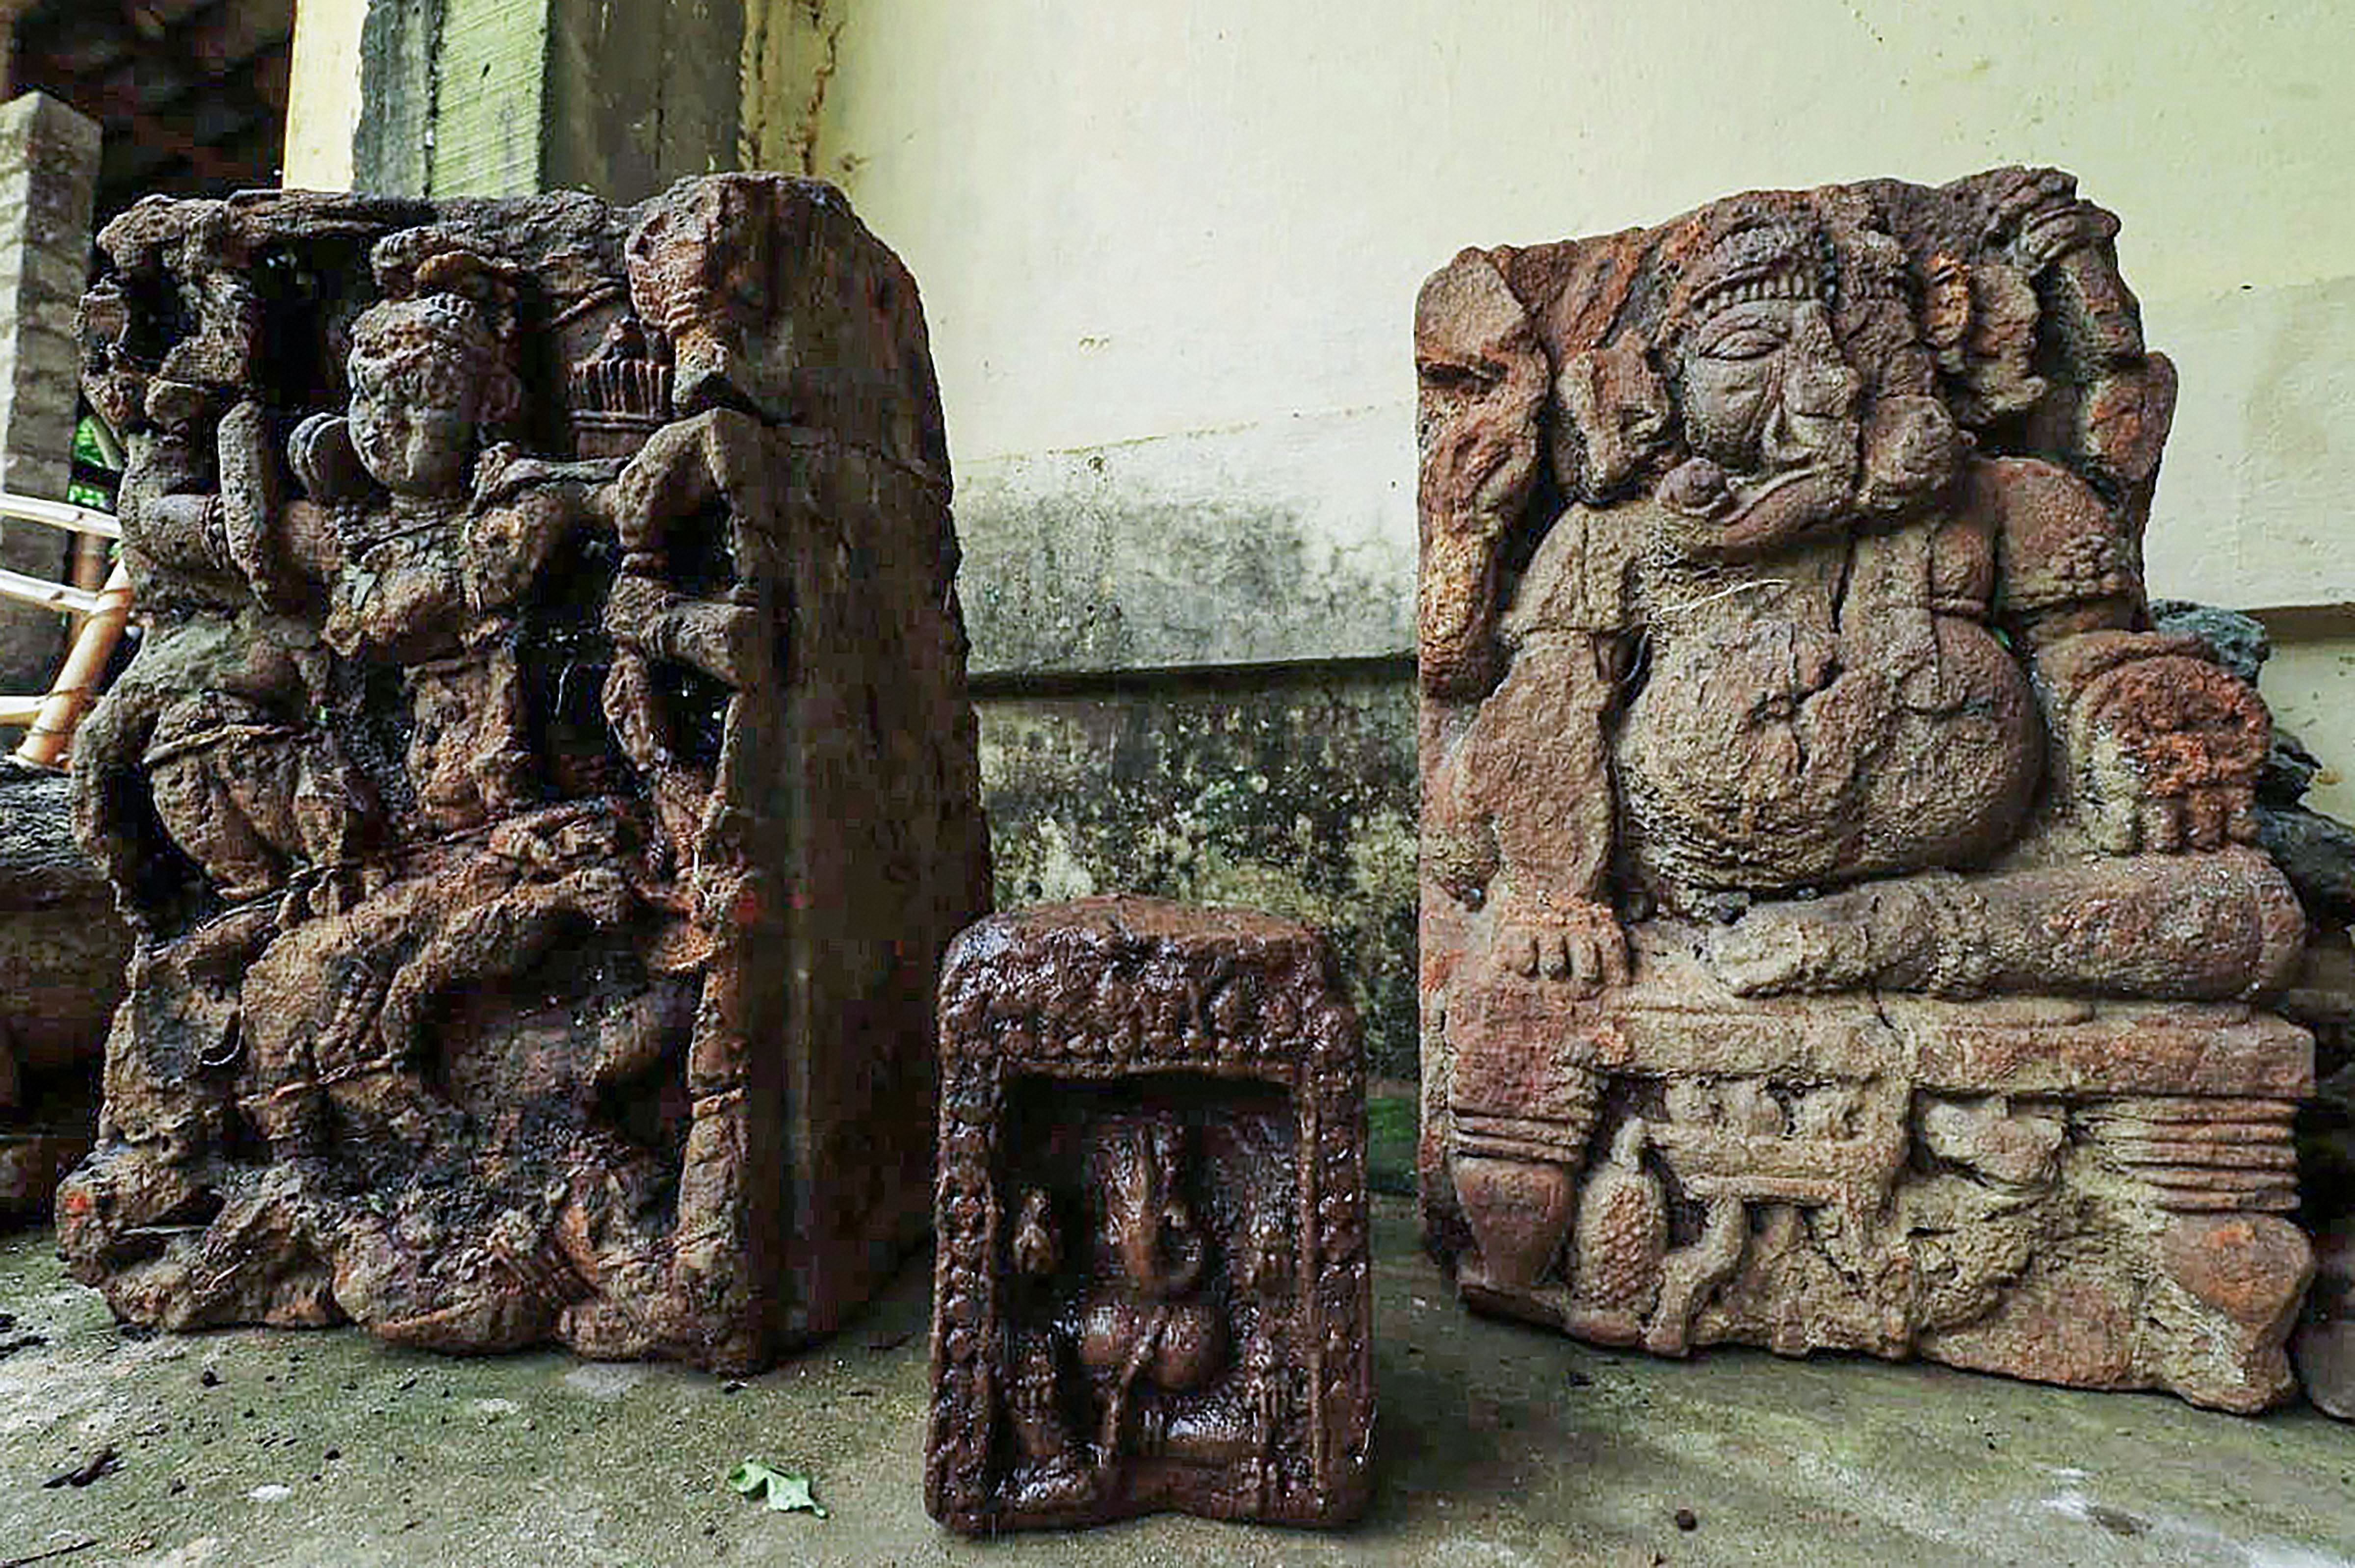 The 2 ancient idols found by 'Rediscover Lost Heritage' team during a survey of the Ratnachira Valley, near Satasankha in Puri. Credit: PTI Photo